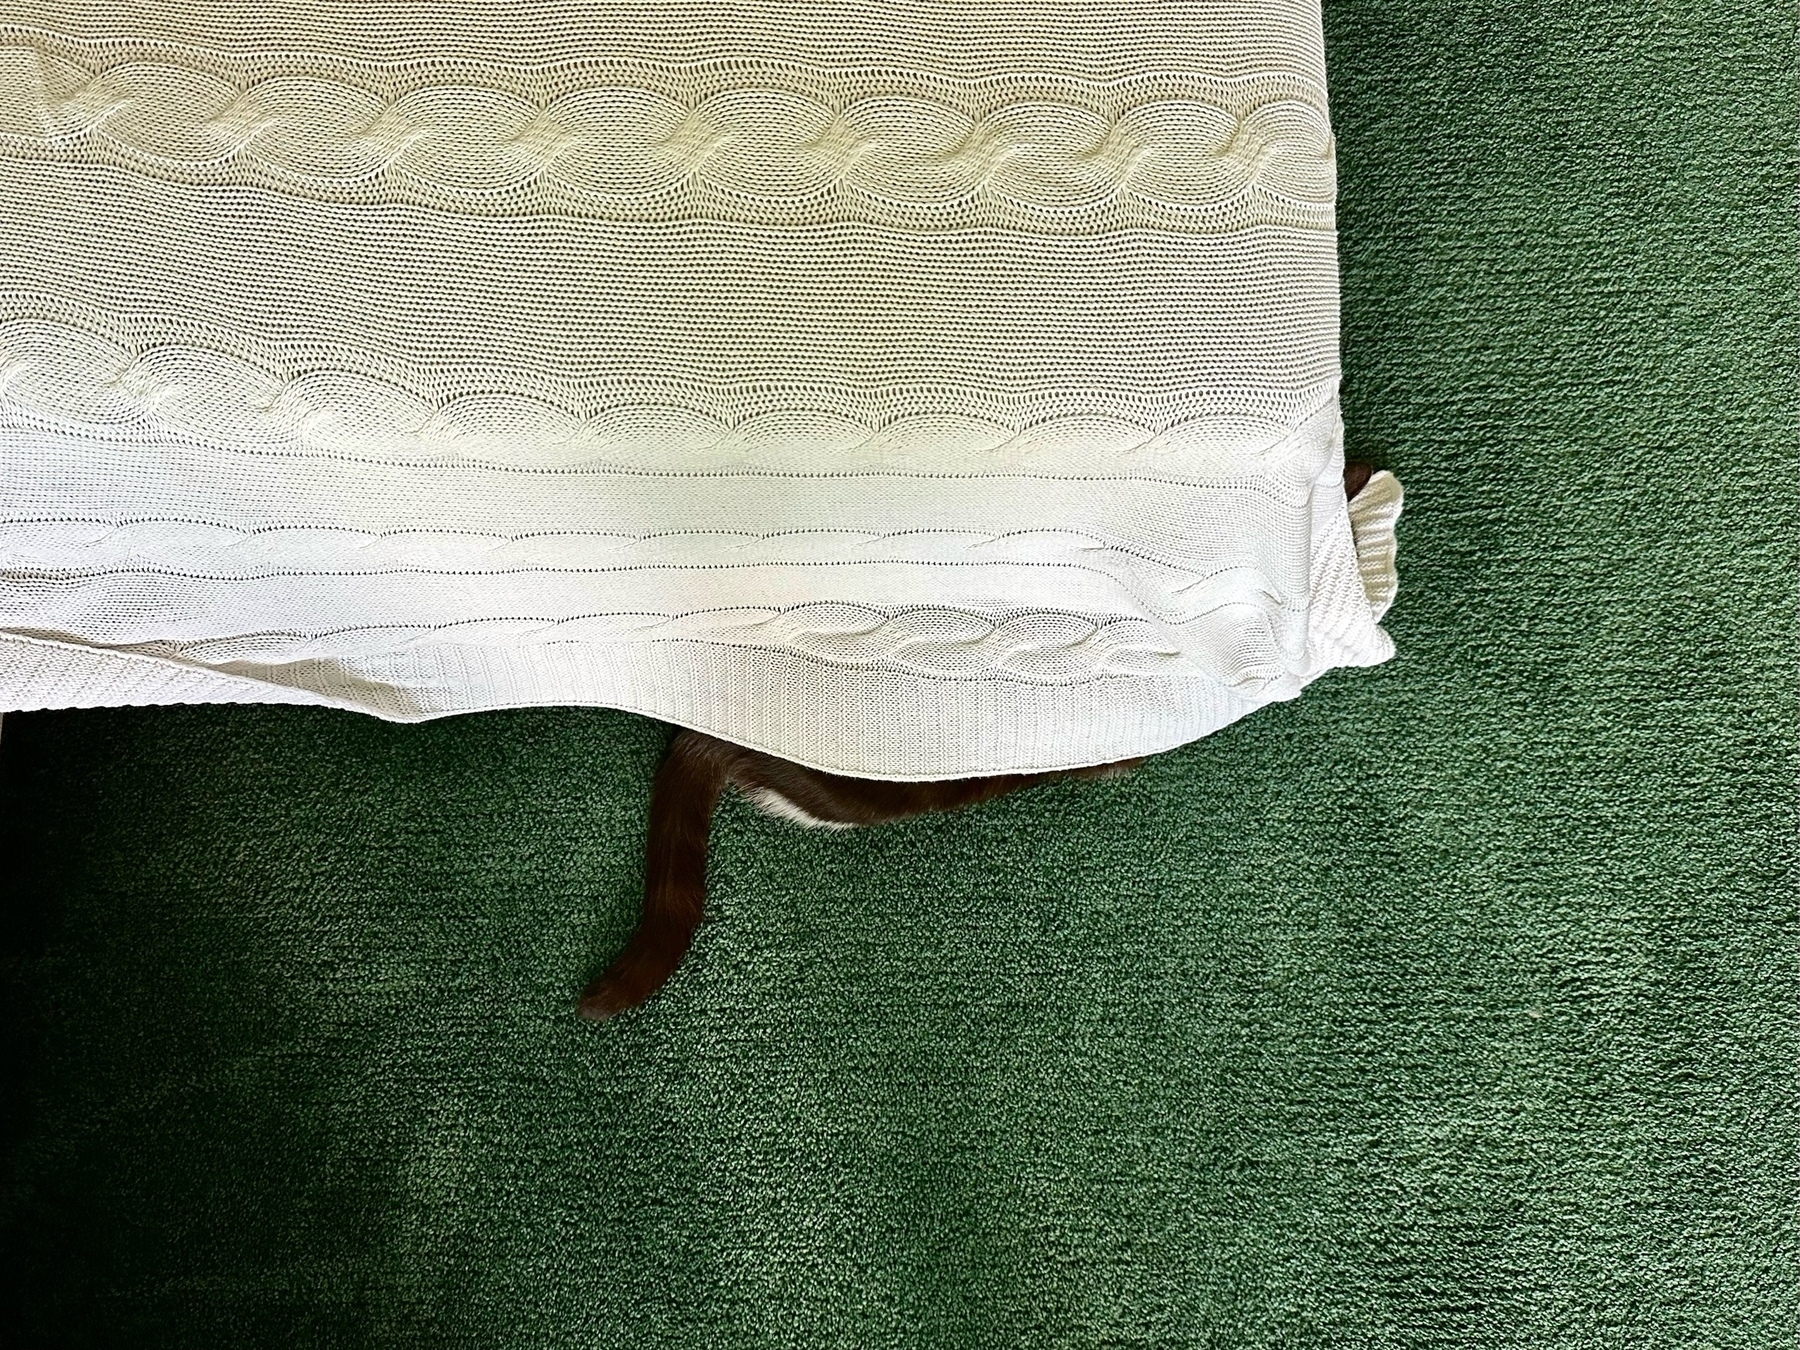 A green carpet on the ground. A couch has a white throw rug over it and the black tail and back leg of a cat is poking out. The rest of the cat is hidden.